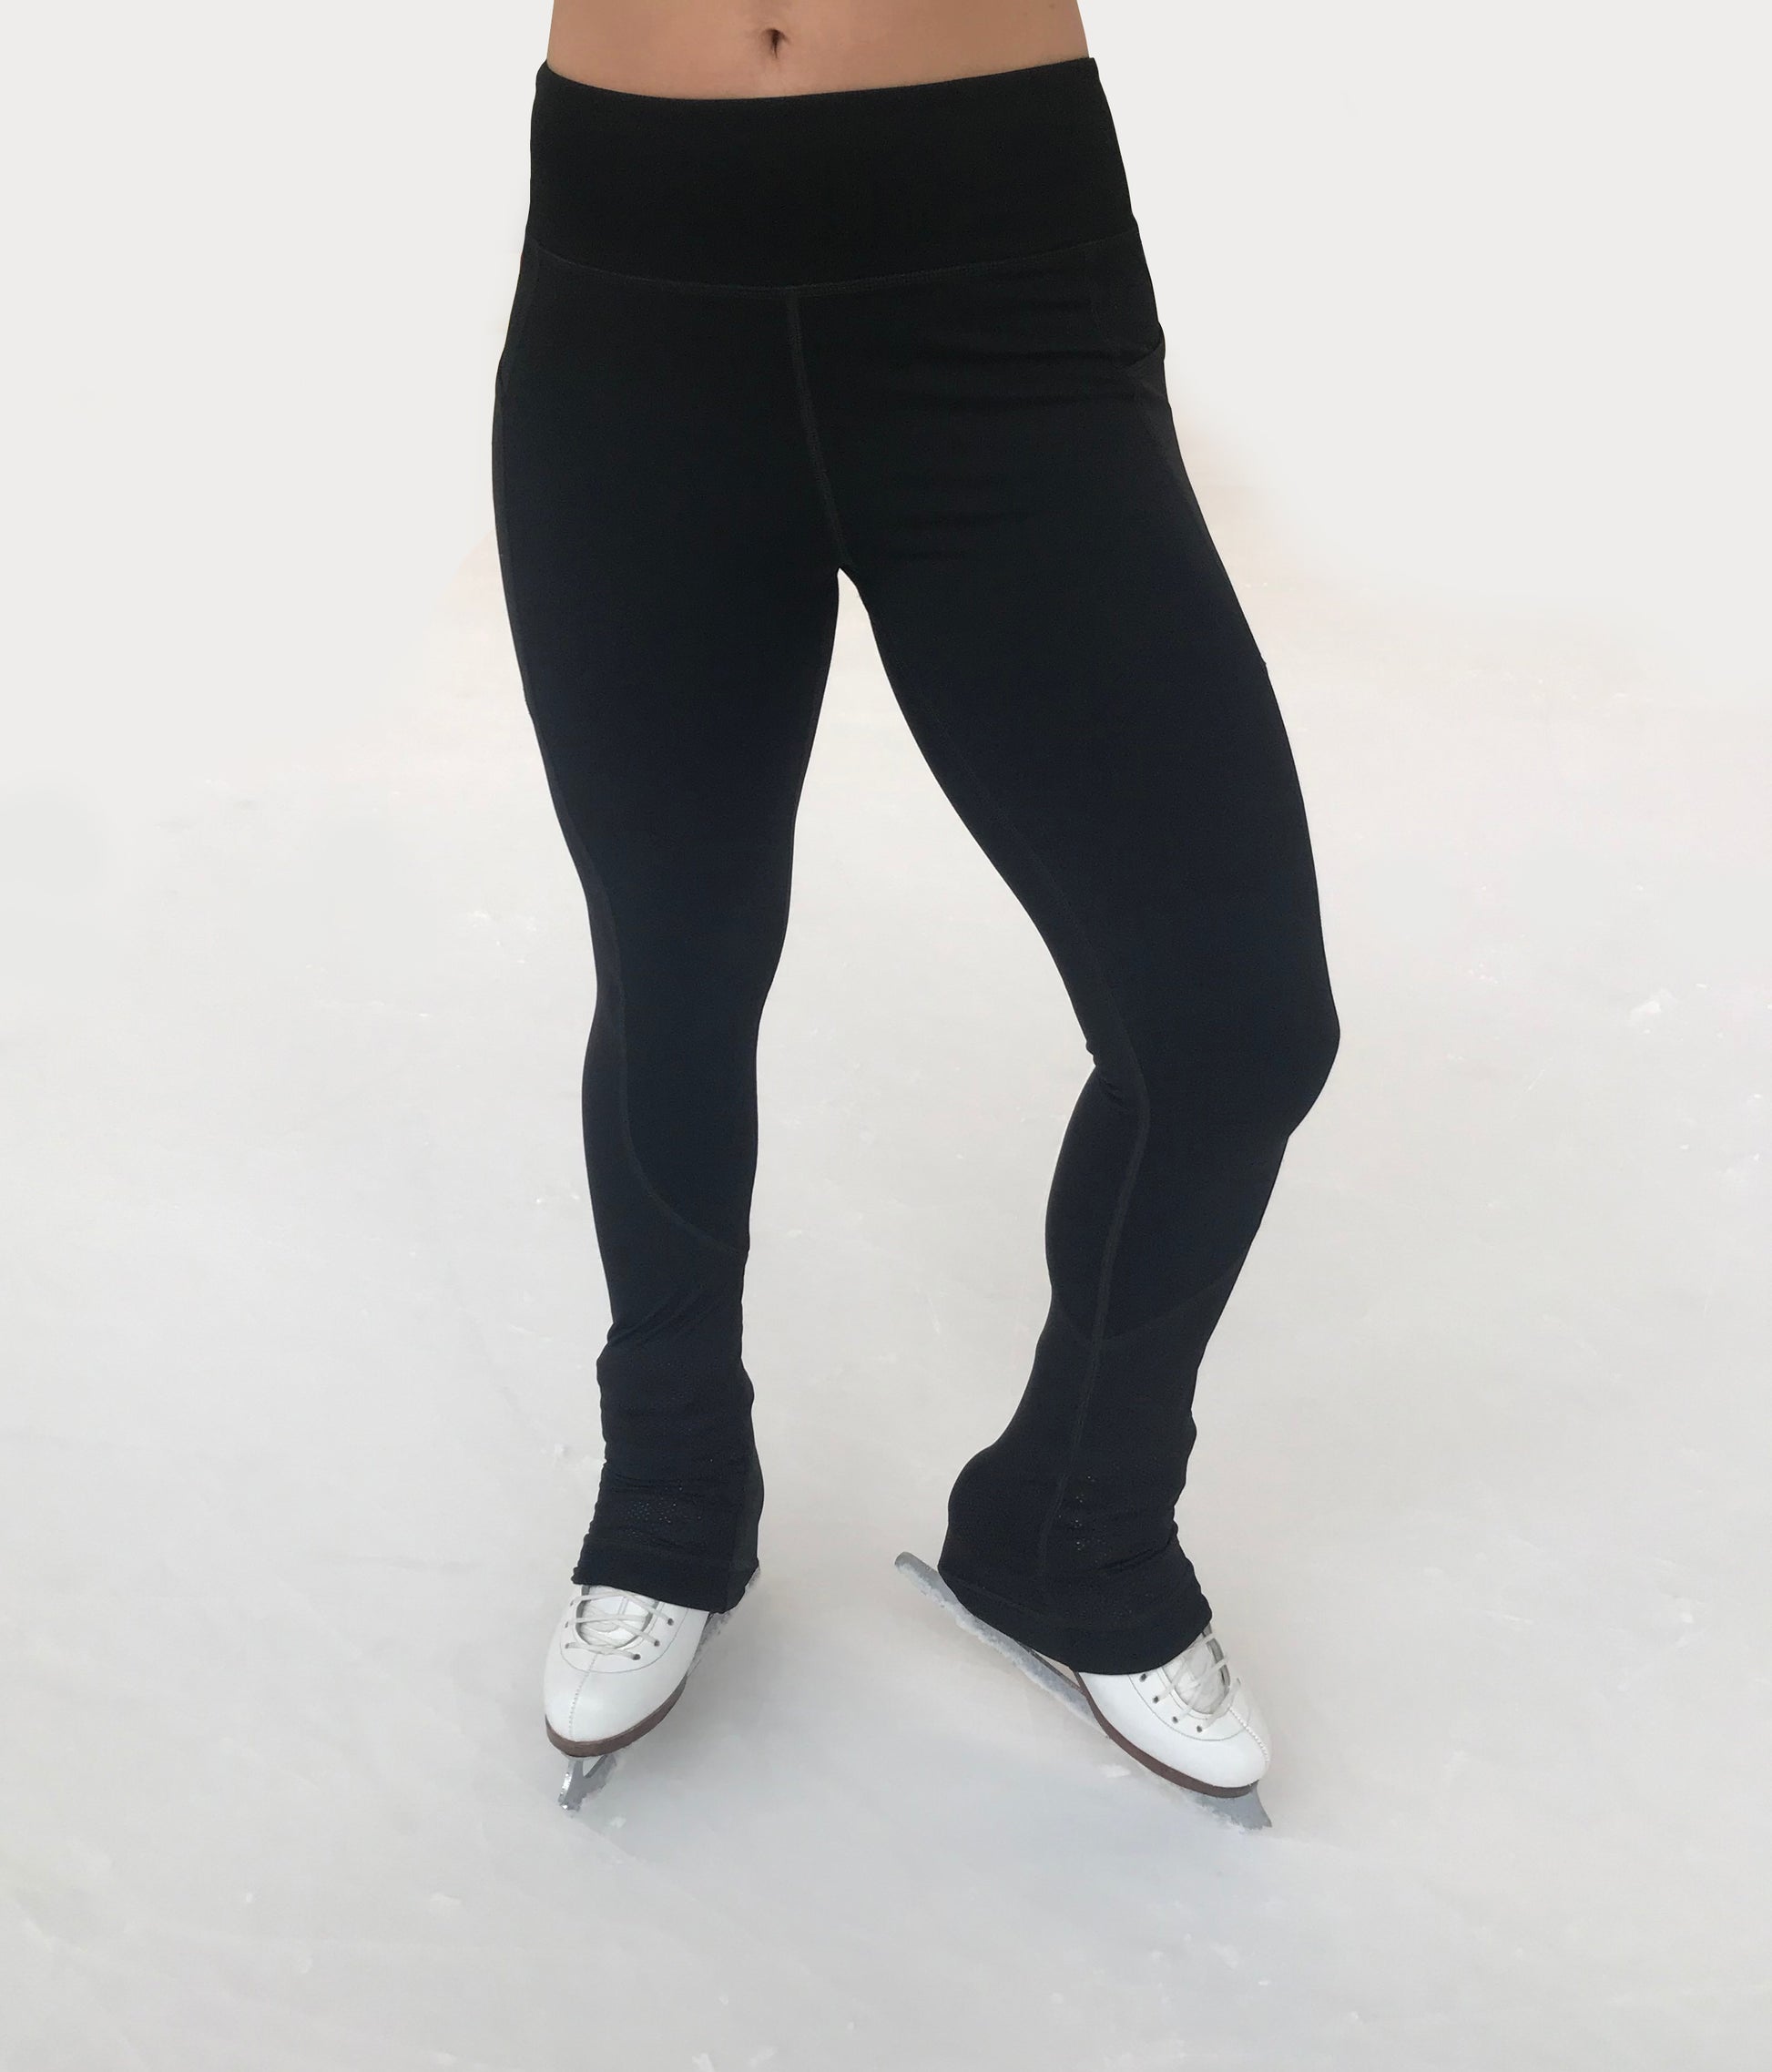 Ice Skating/Figure Skating Practice Pants & Over The Boot Tights Skate  Pants Leggings for Ice Skate Practice Competition - Soft, Stretch & Warm M